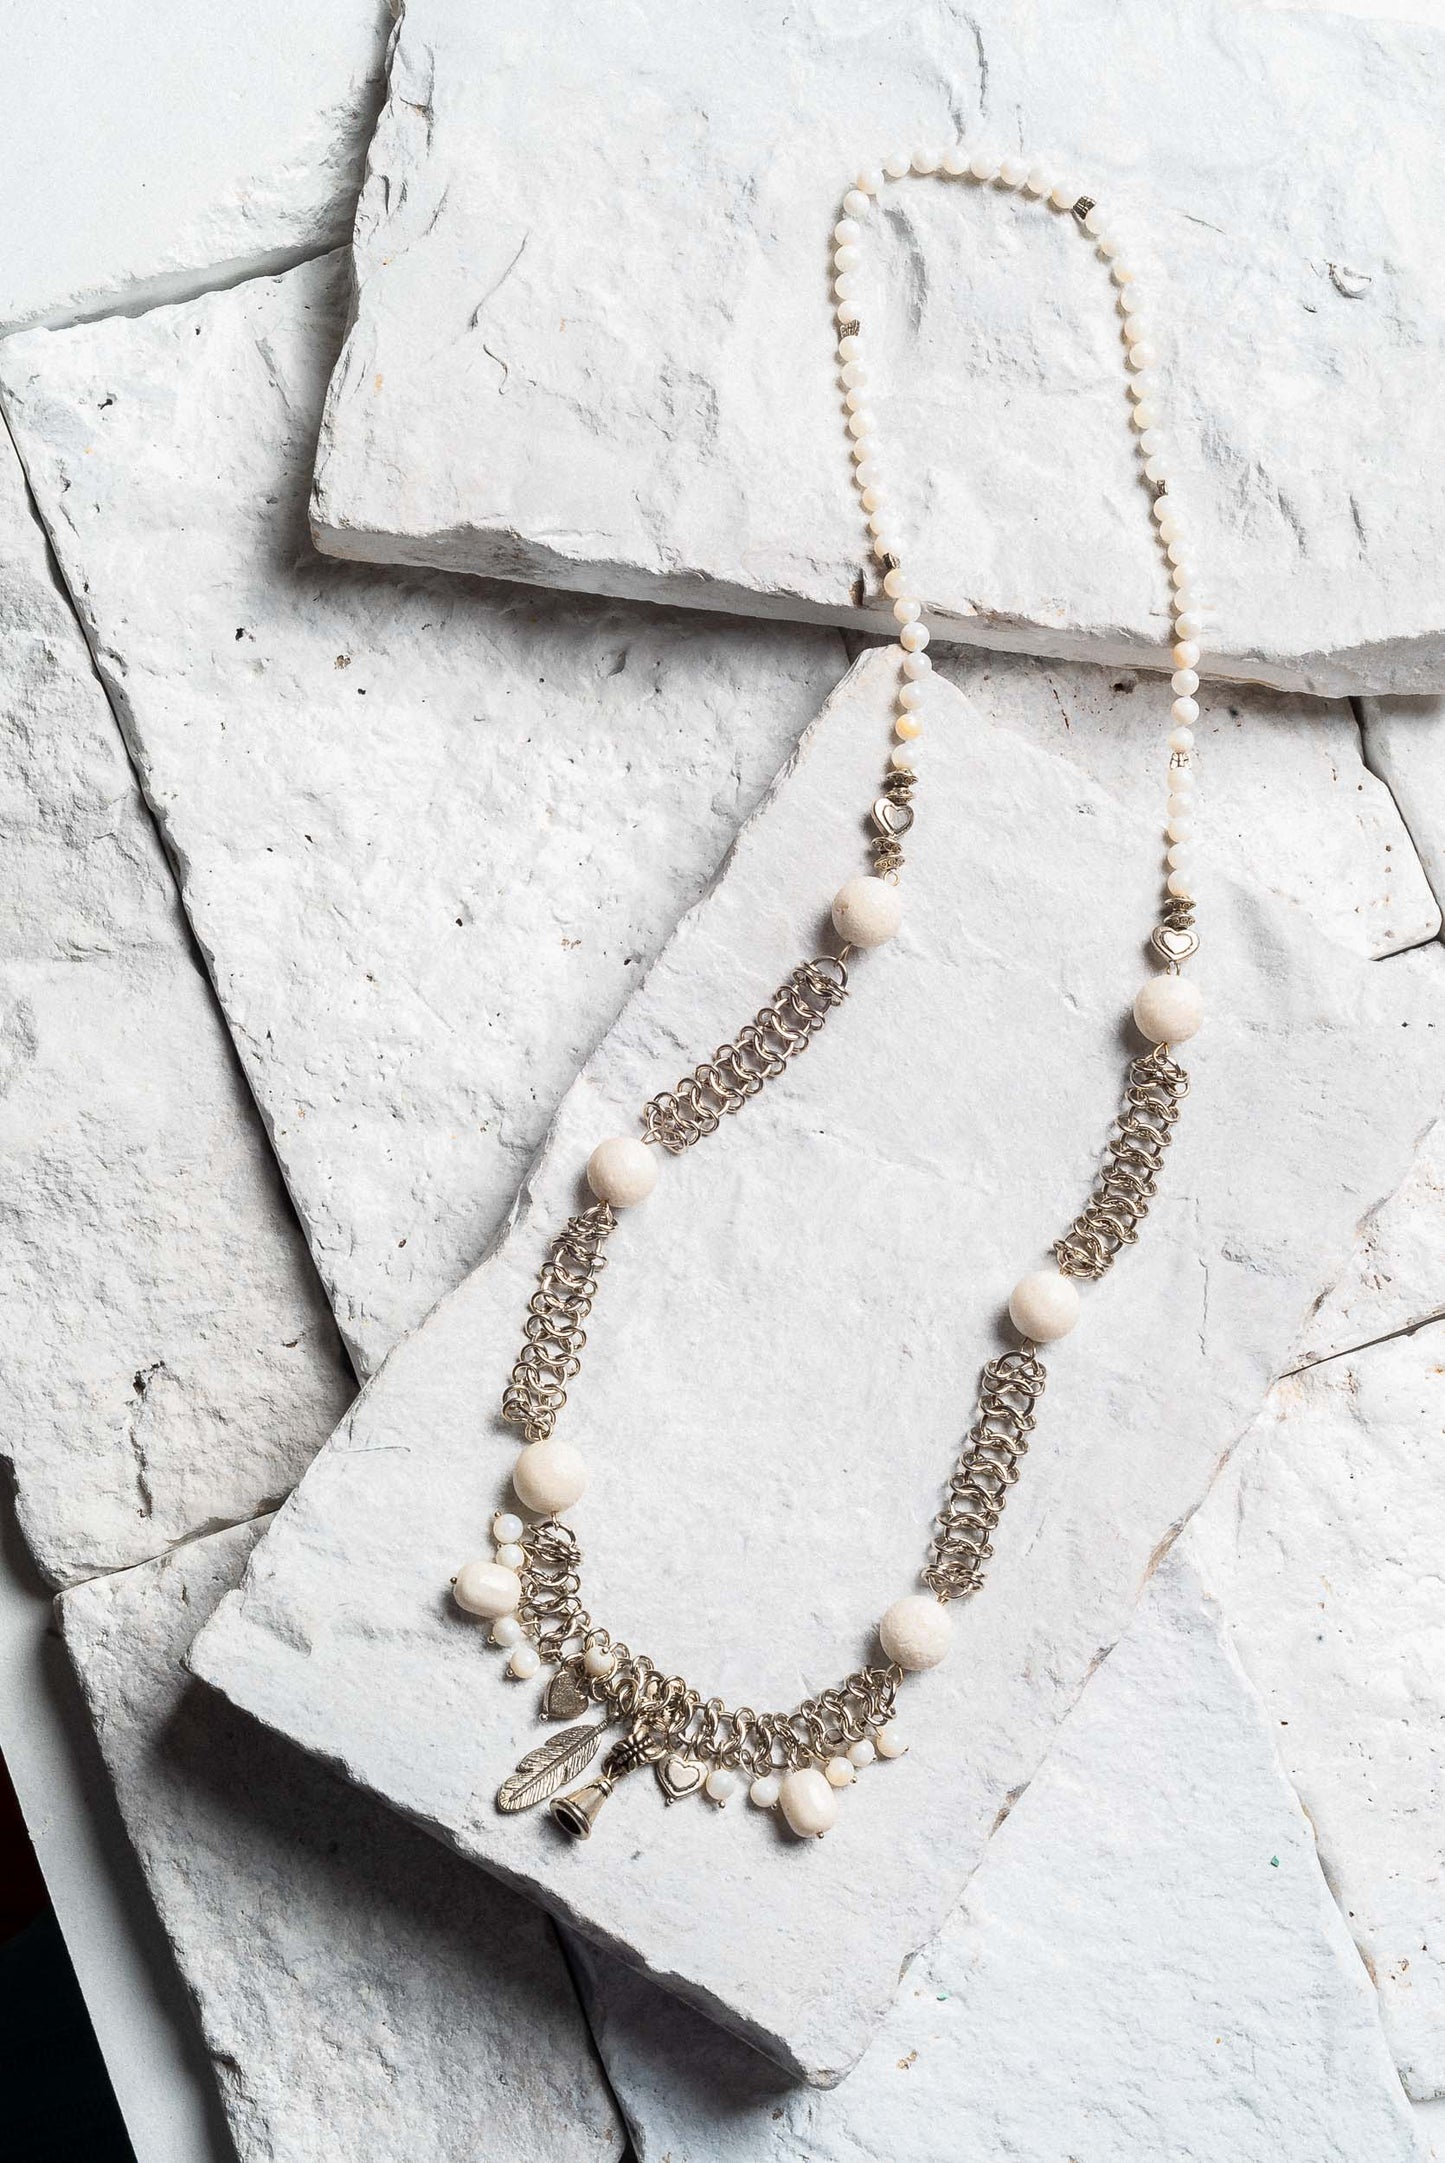 A long necklace made of dainty silver chain links and large white beads. The middle features several charms, a leaf, a small bell, and two hearts.